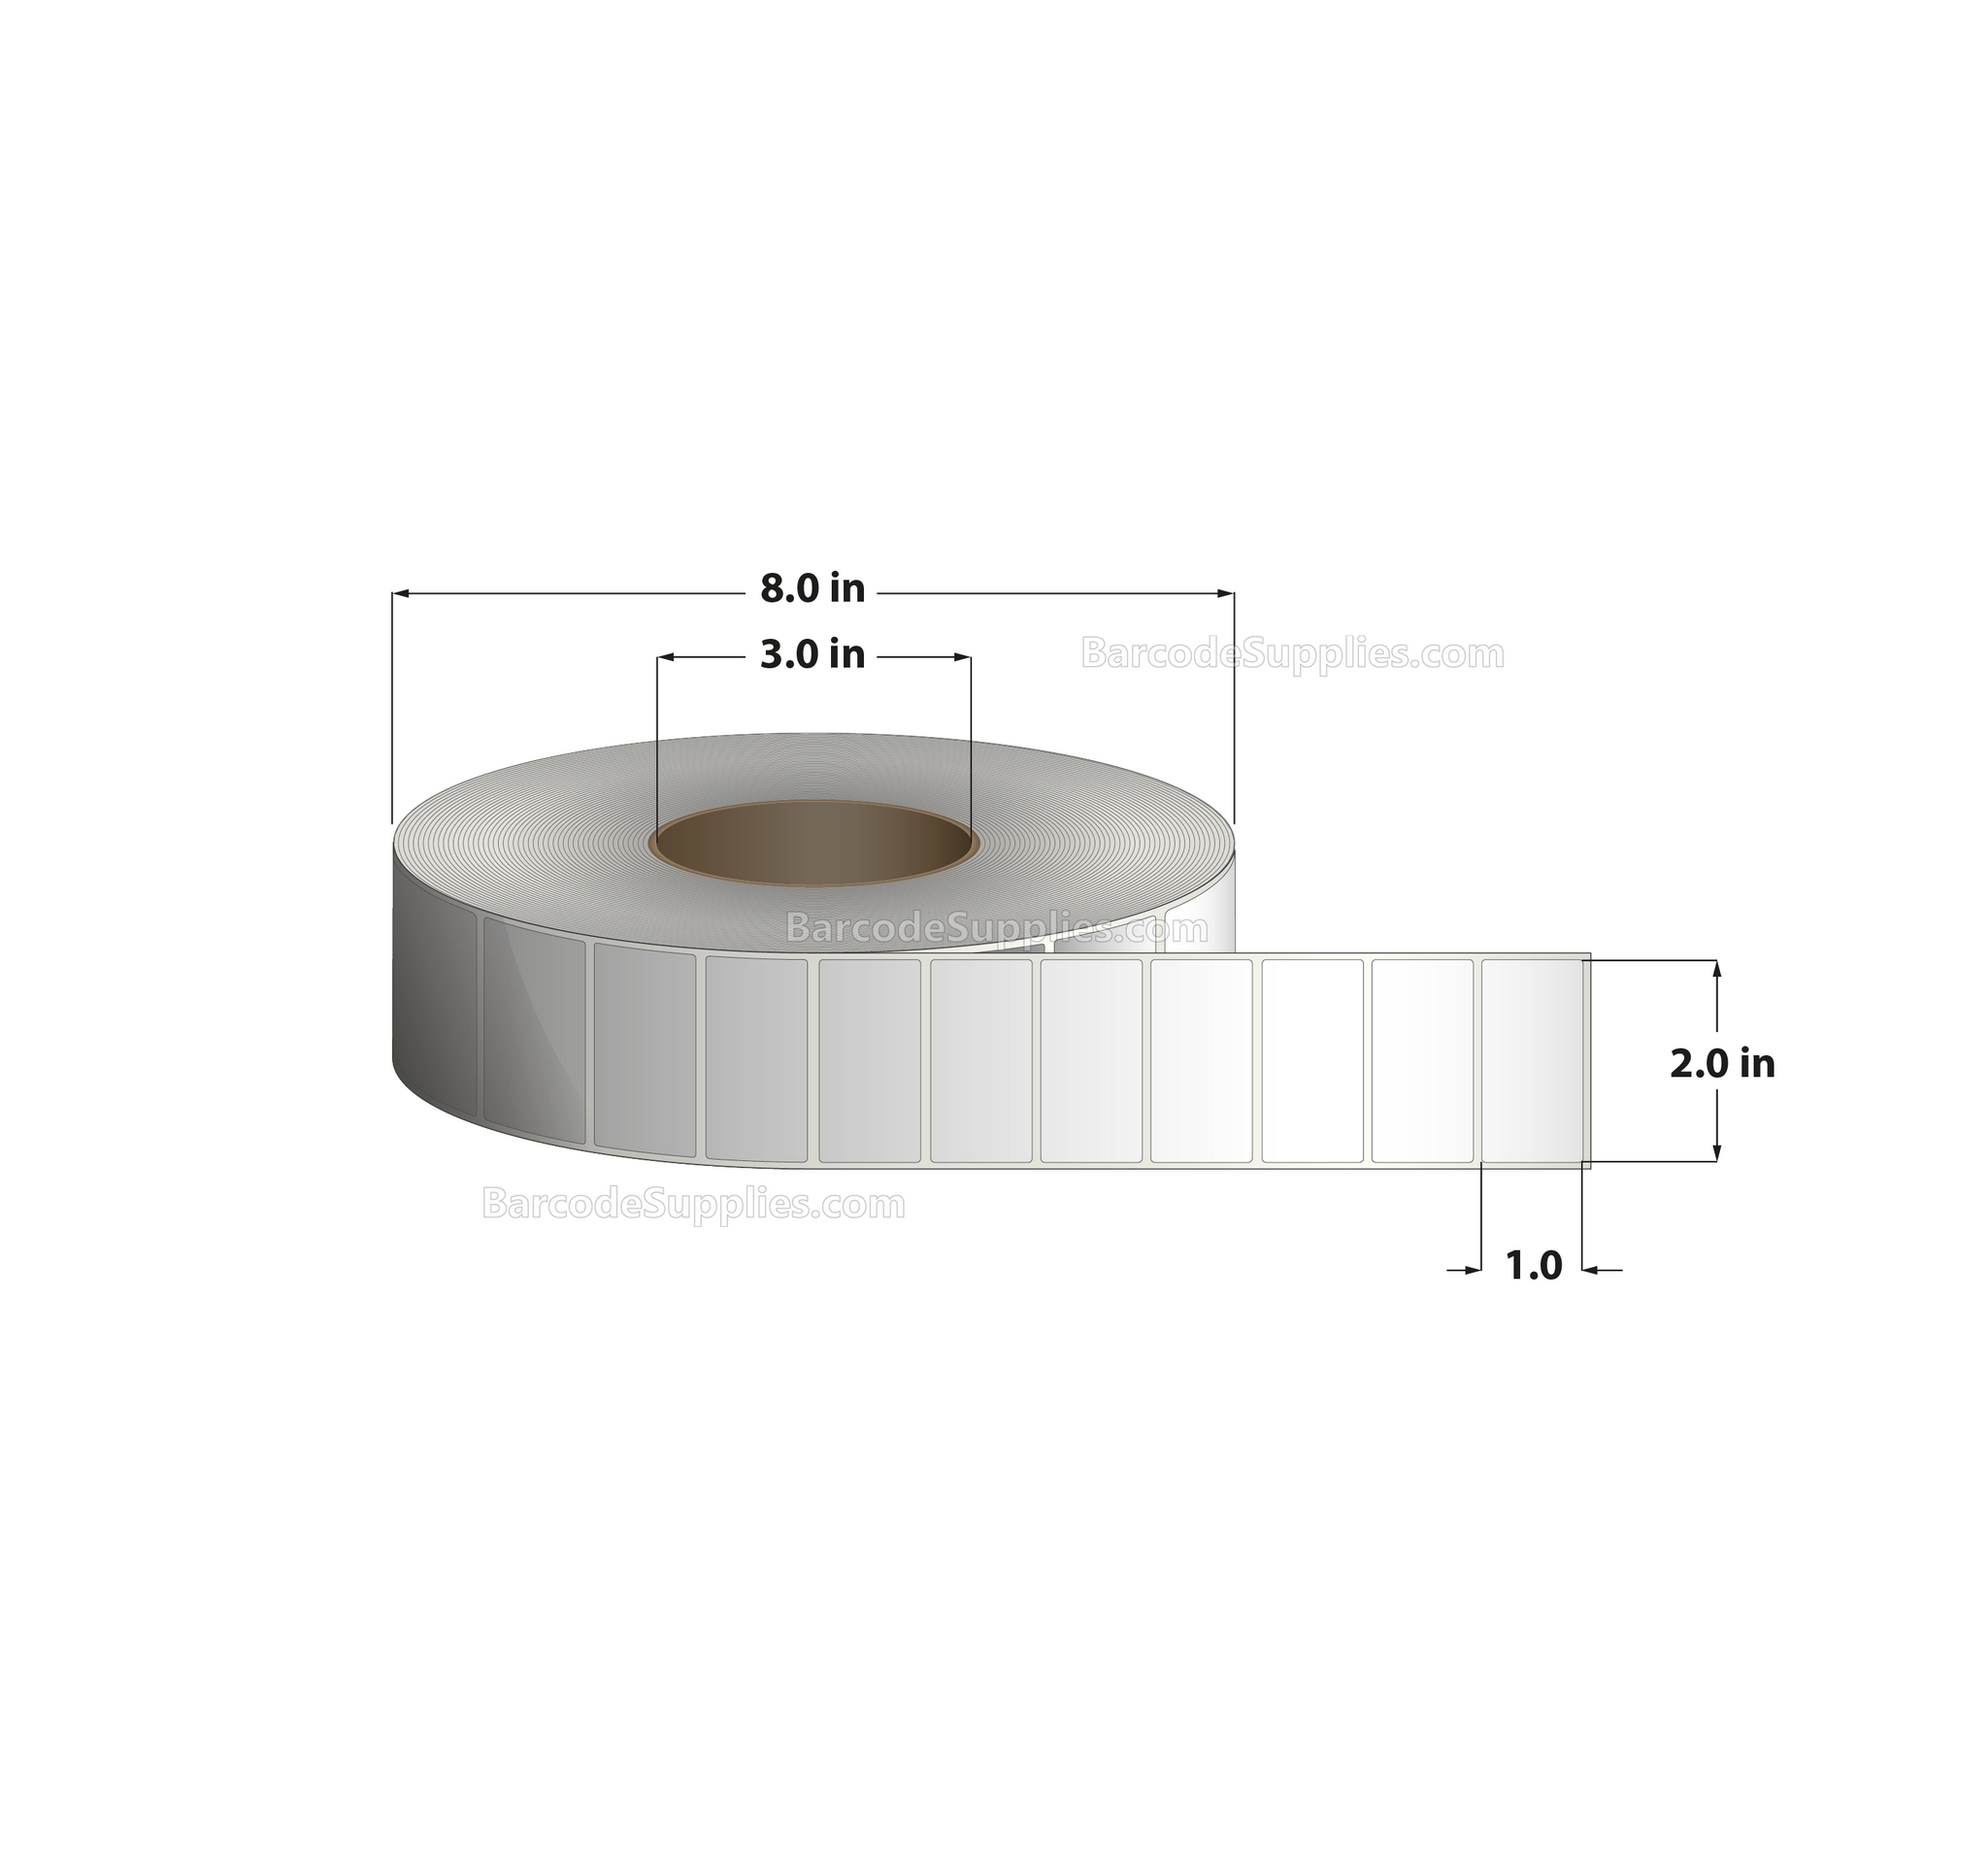 2 x 1 Direct Thermal White Labels With Acrylic Adhesive - No Perforation - 5500 Labels Per Roll - Carton Of 8 Rolls - 44000 Labels Total - MPN: RD-2-1-5500-NP - BarcodeSource, Inc.